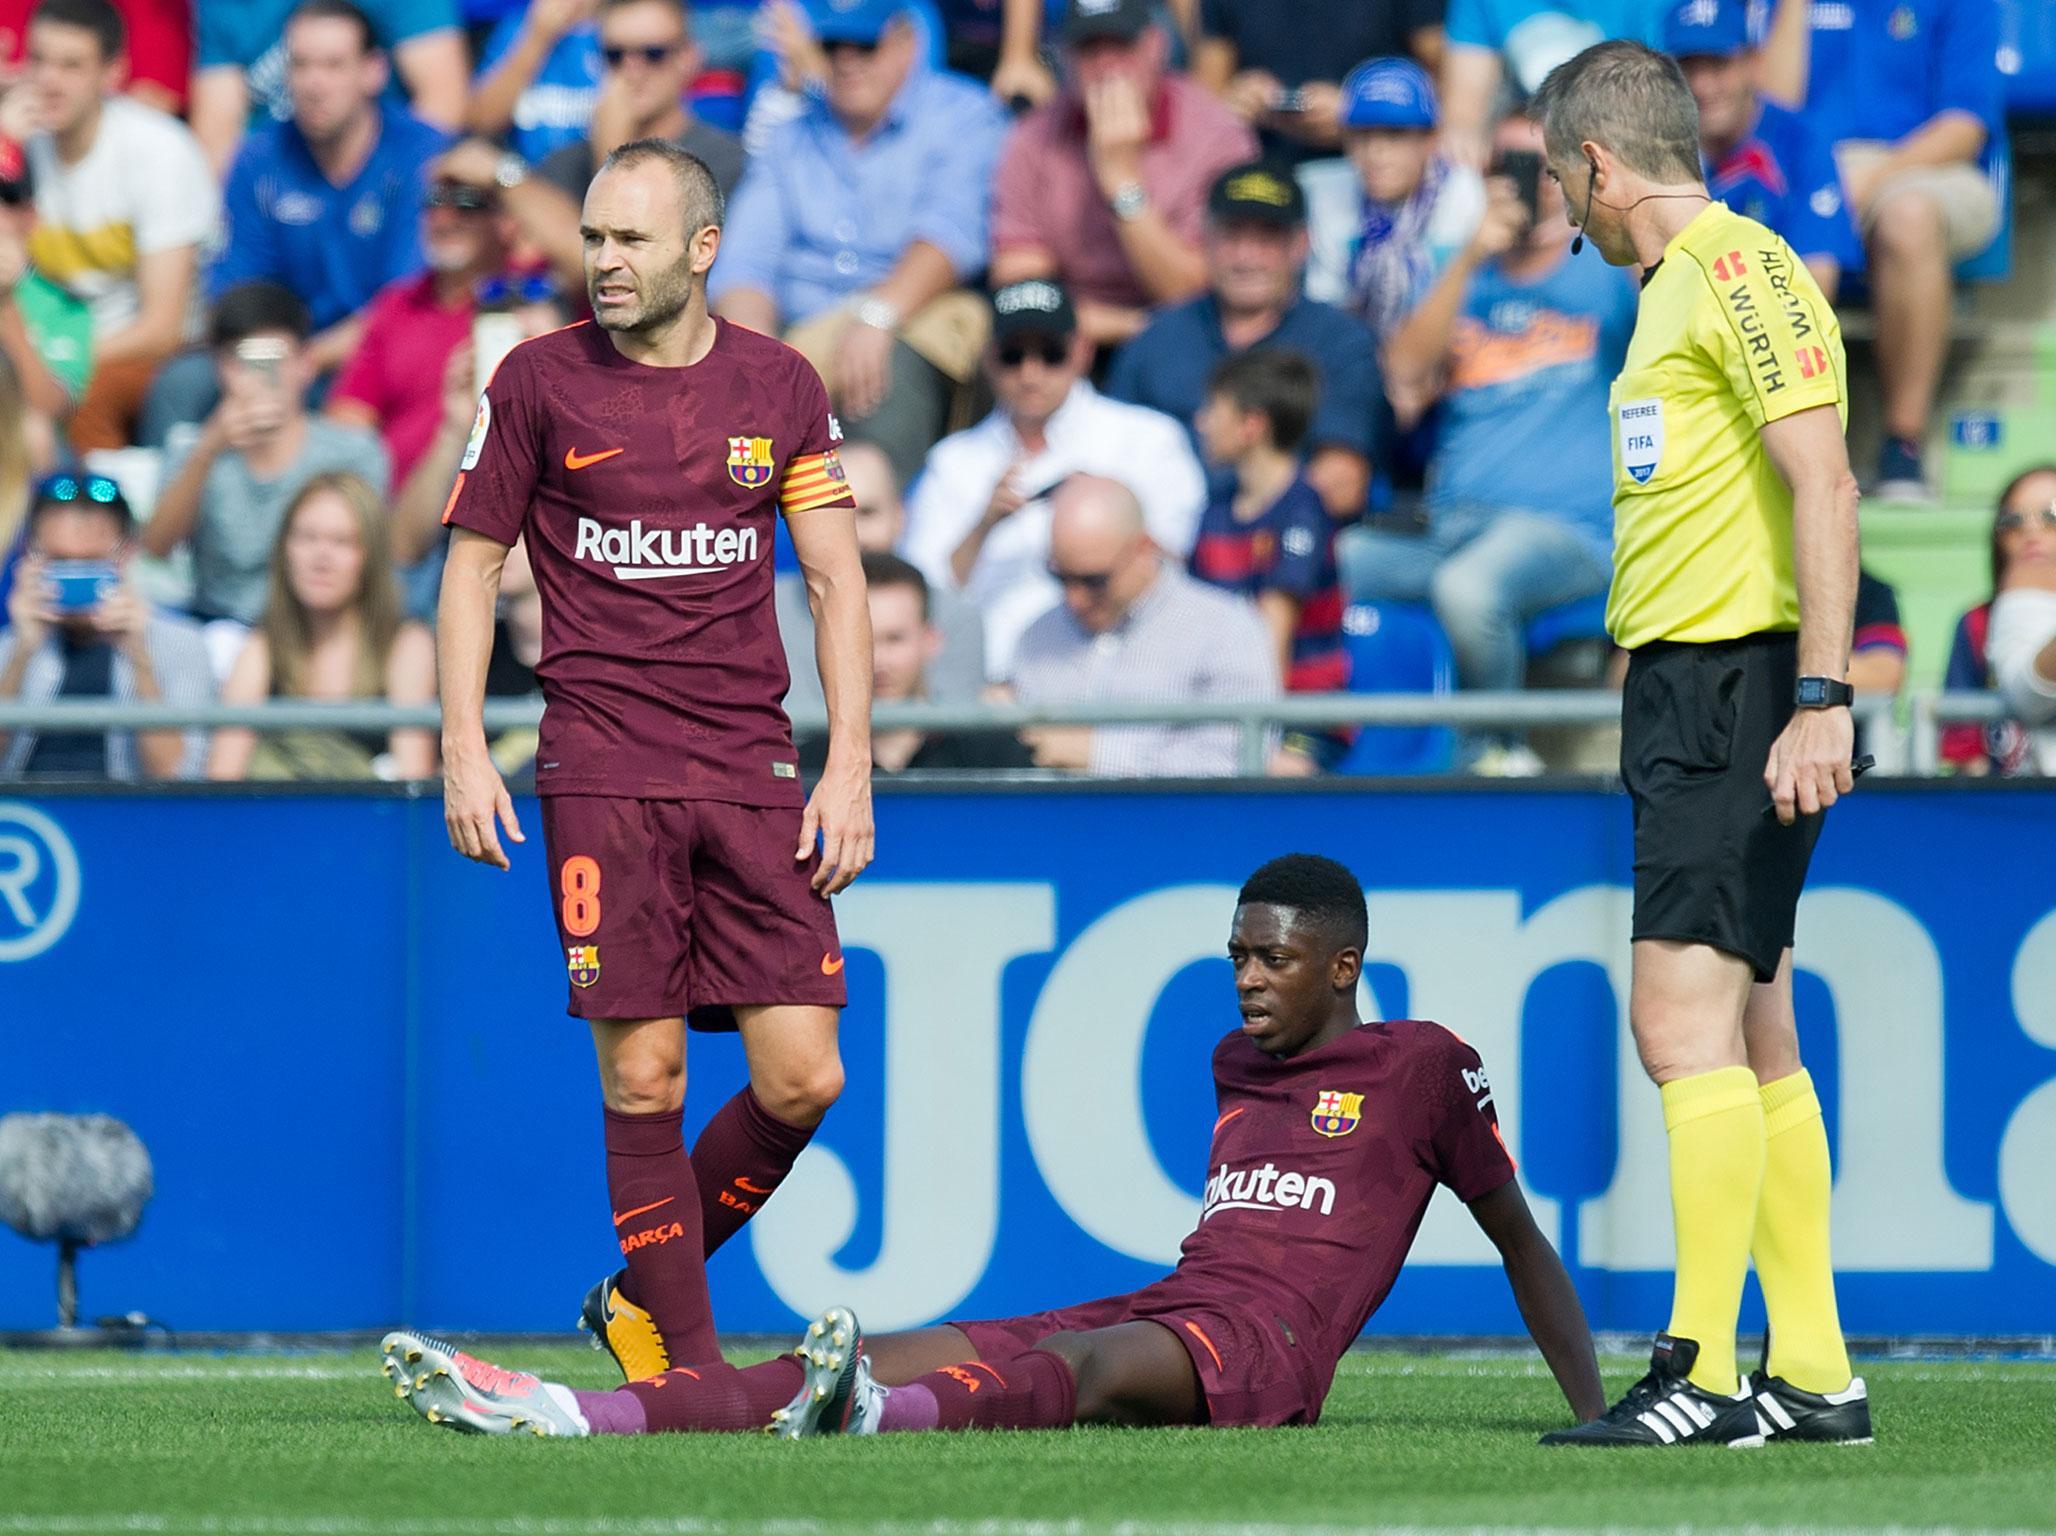 Ousmane Dembele will be sidelined until 2018